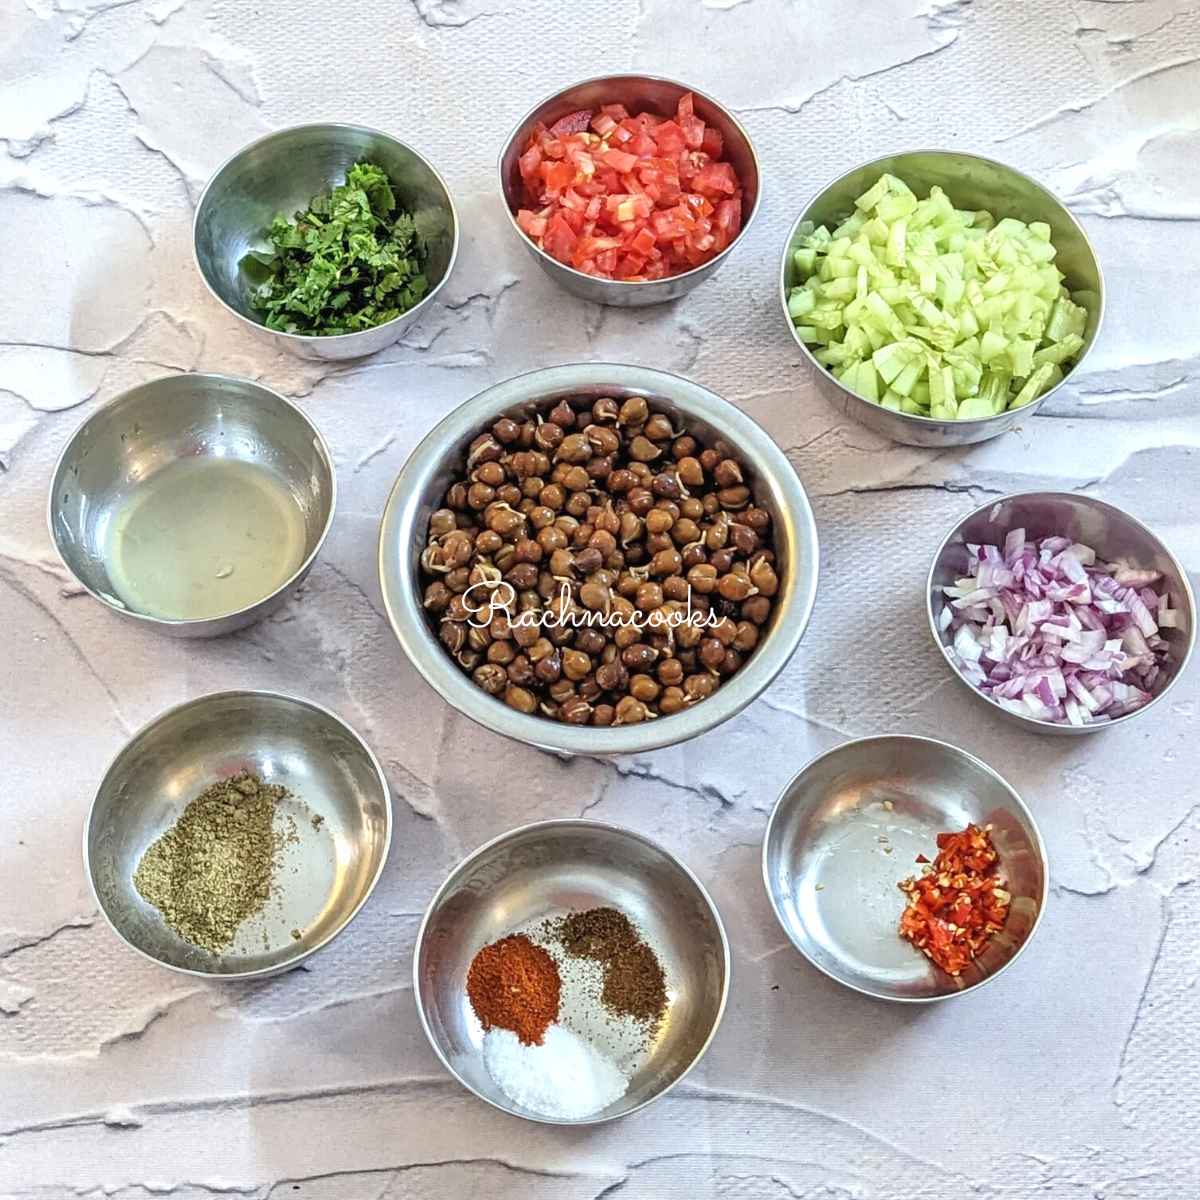 Ingredients for the salad are in bowls: boiled black chickpeas, chopped onion, cucumber, tomatoes, cilantro, chillies, lemon juice and spices.